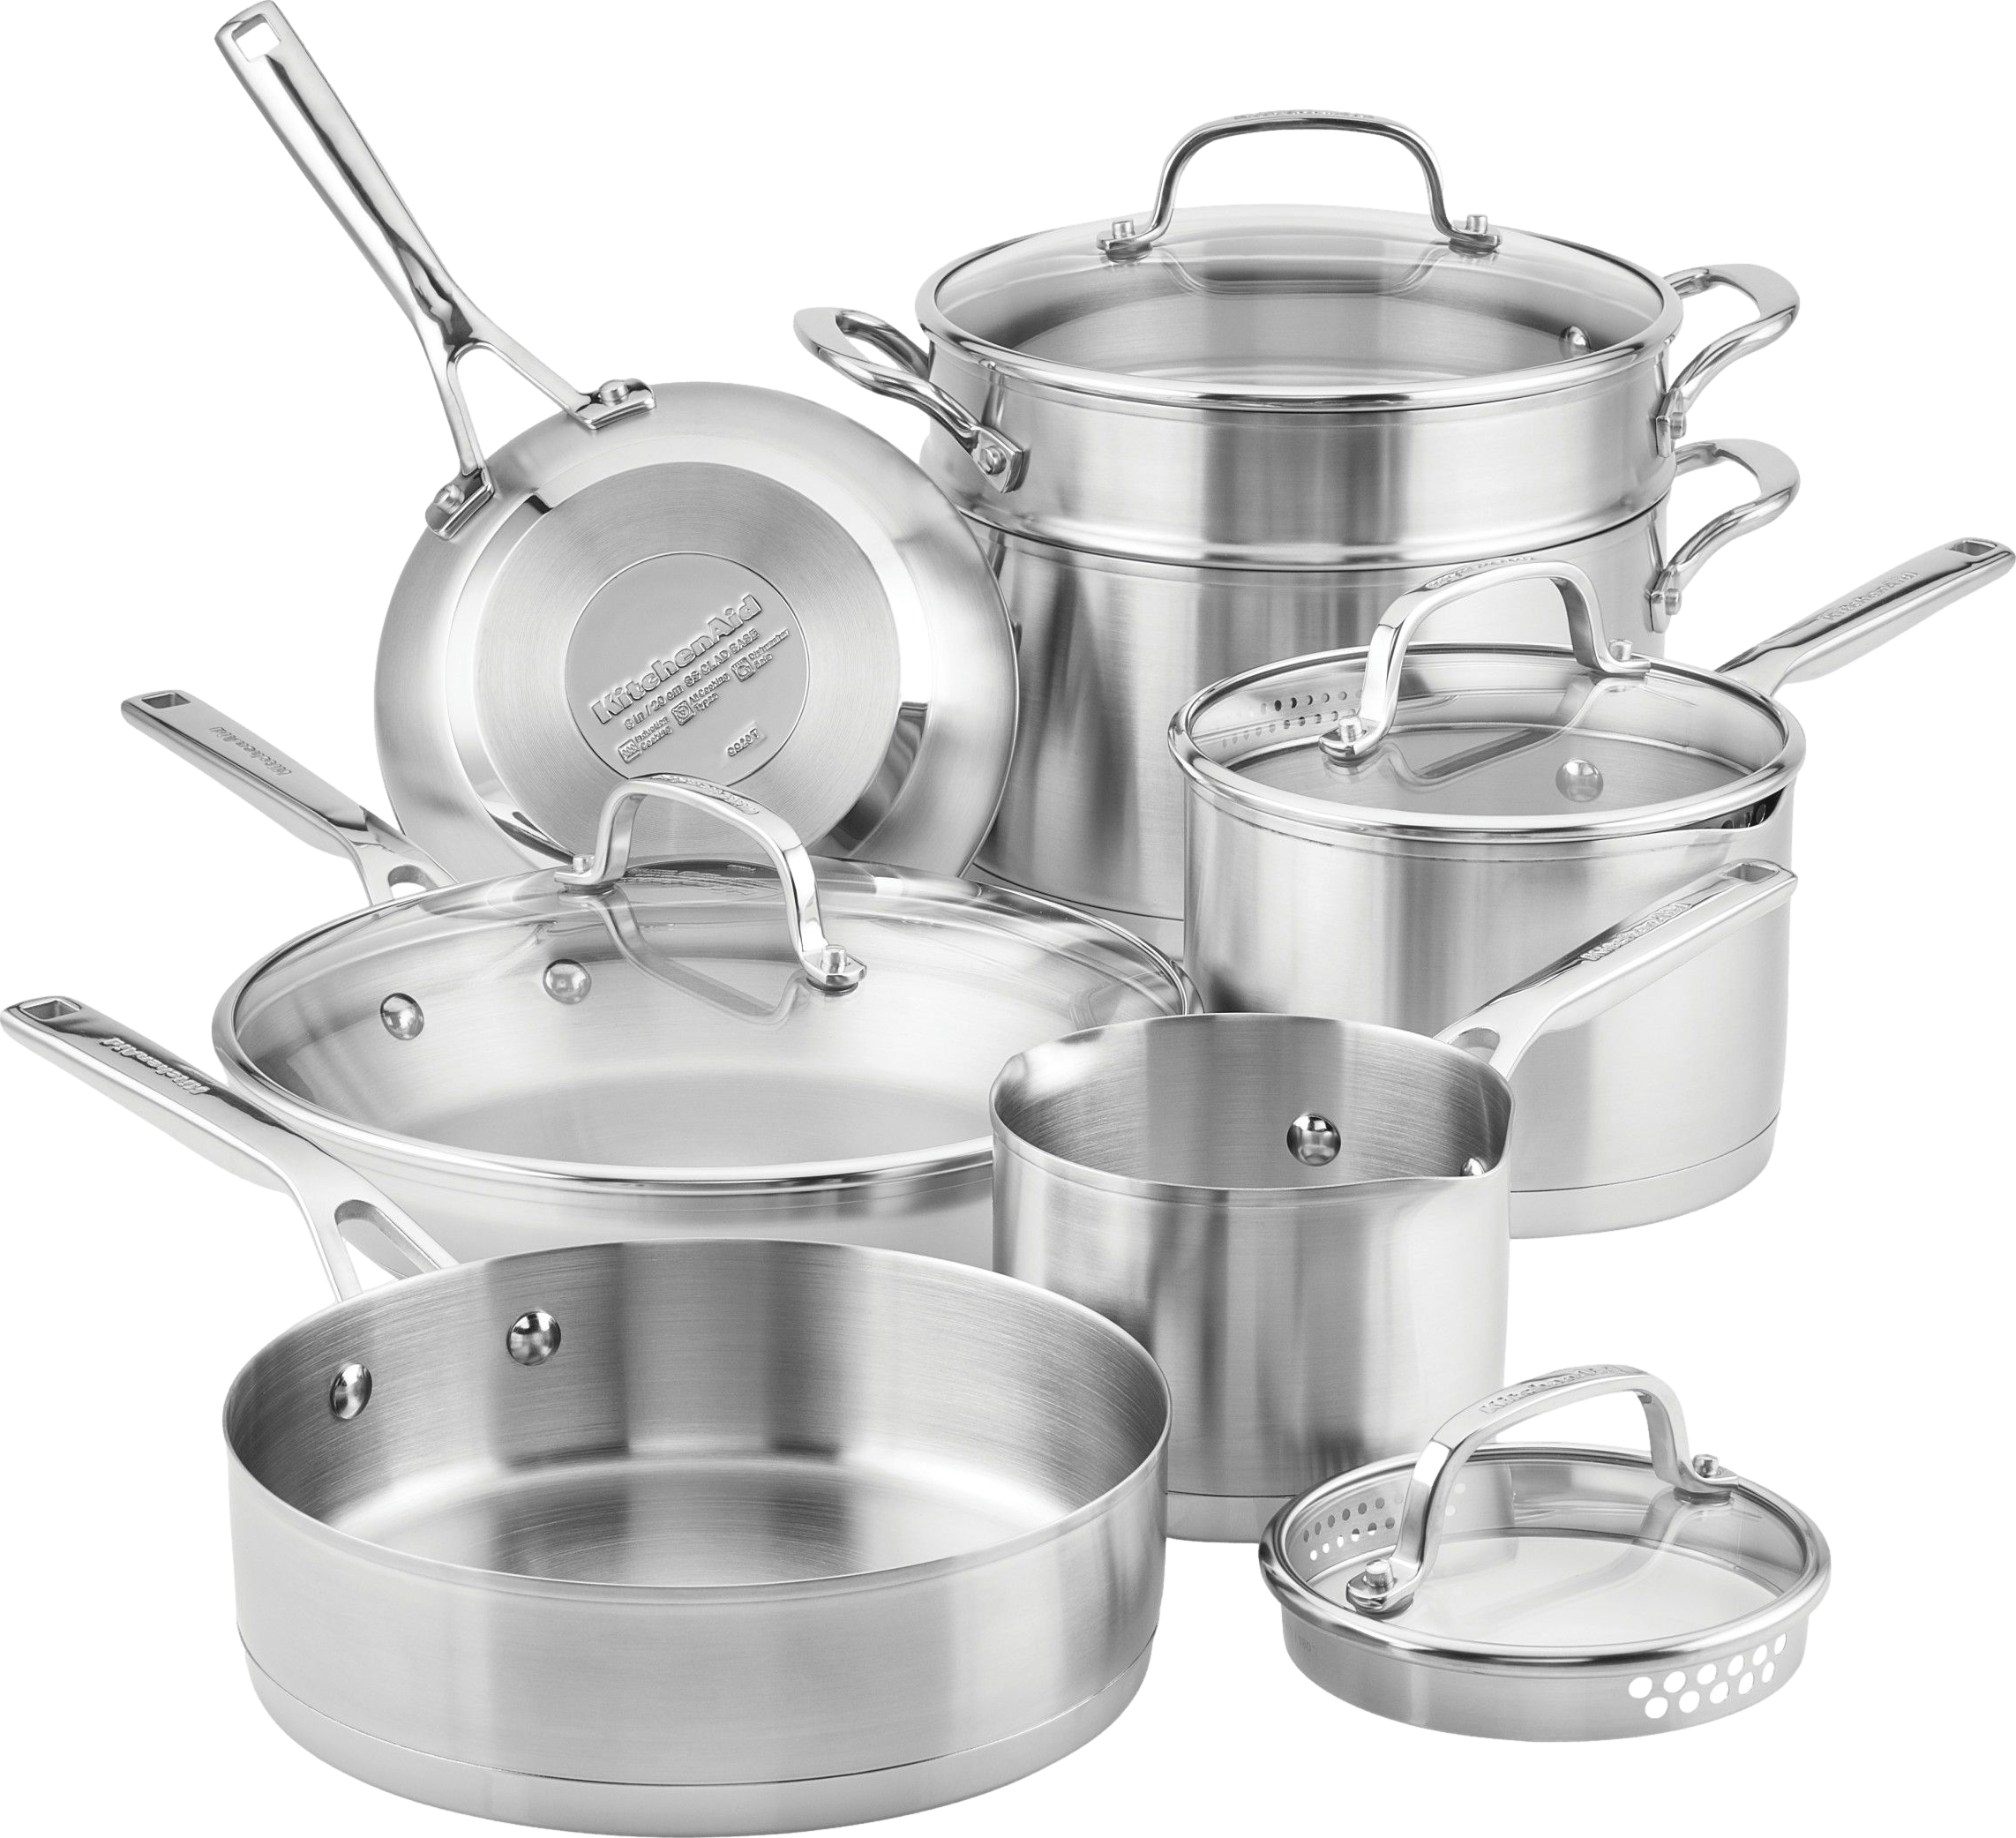 Kitchenaid Vs Cuisinart Stainless Steel Cookware: Ultimate Comparison